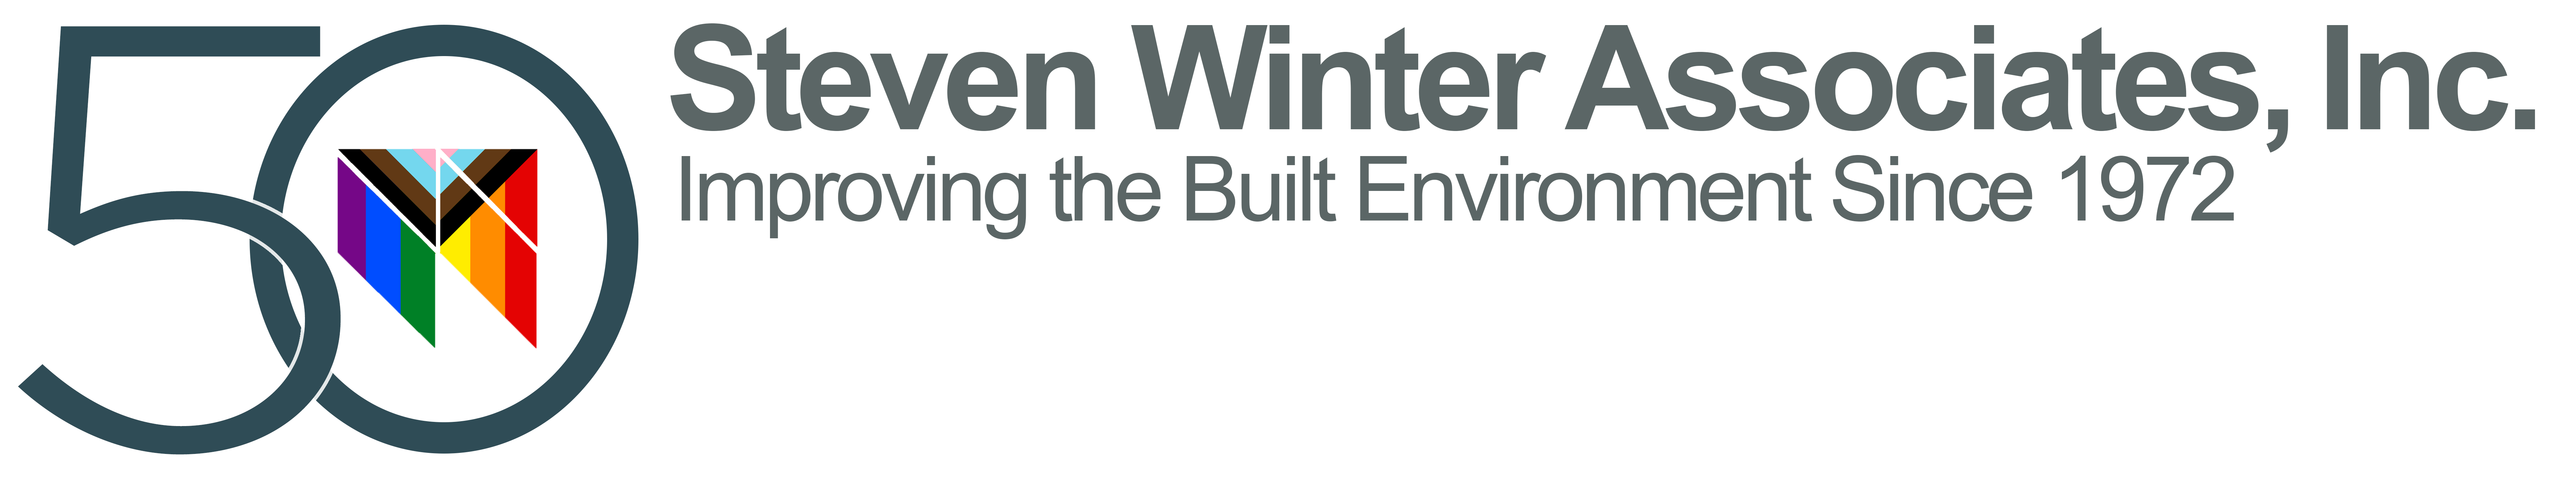 Pride logo. Steven Winter Associates, Incorporated. Improving the Built Environment Since 1972.